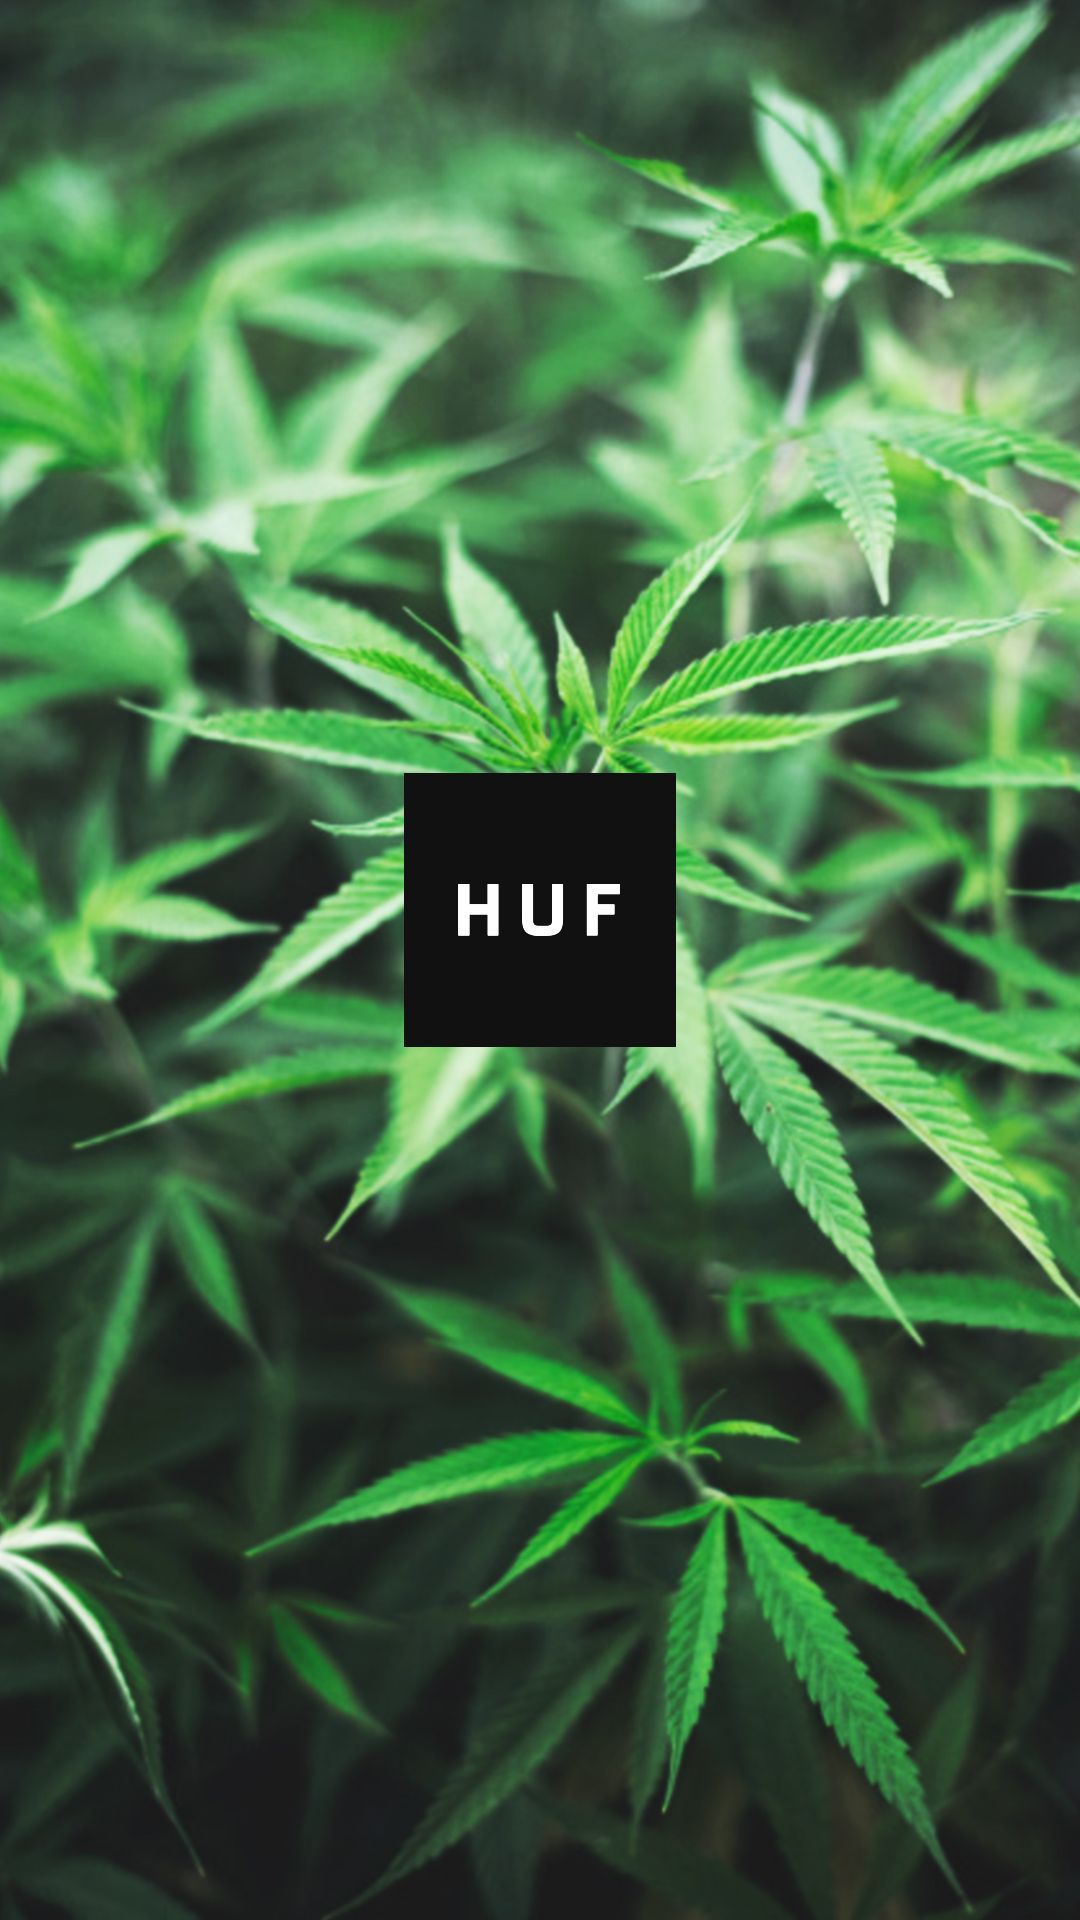 Huf Weed Wallpaper On